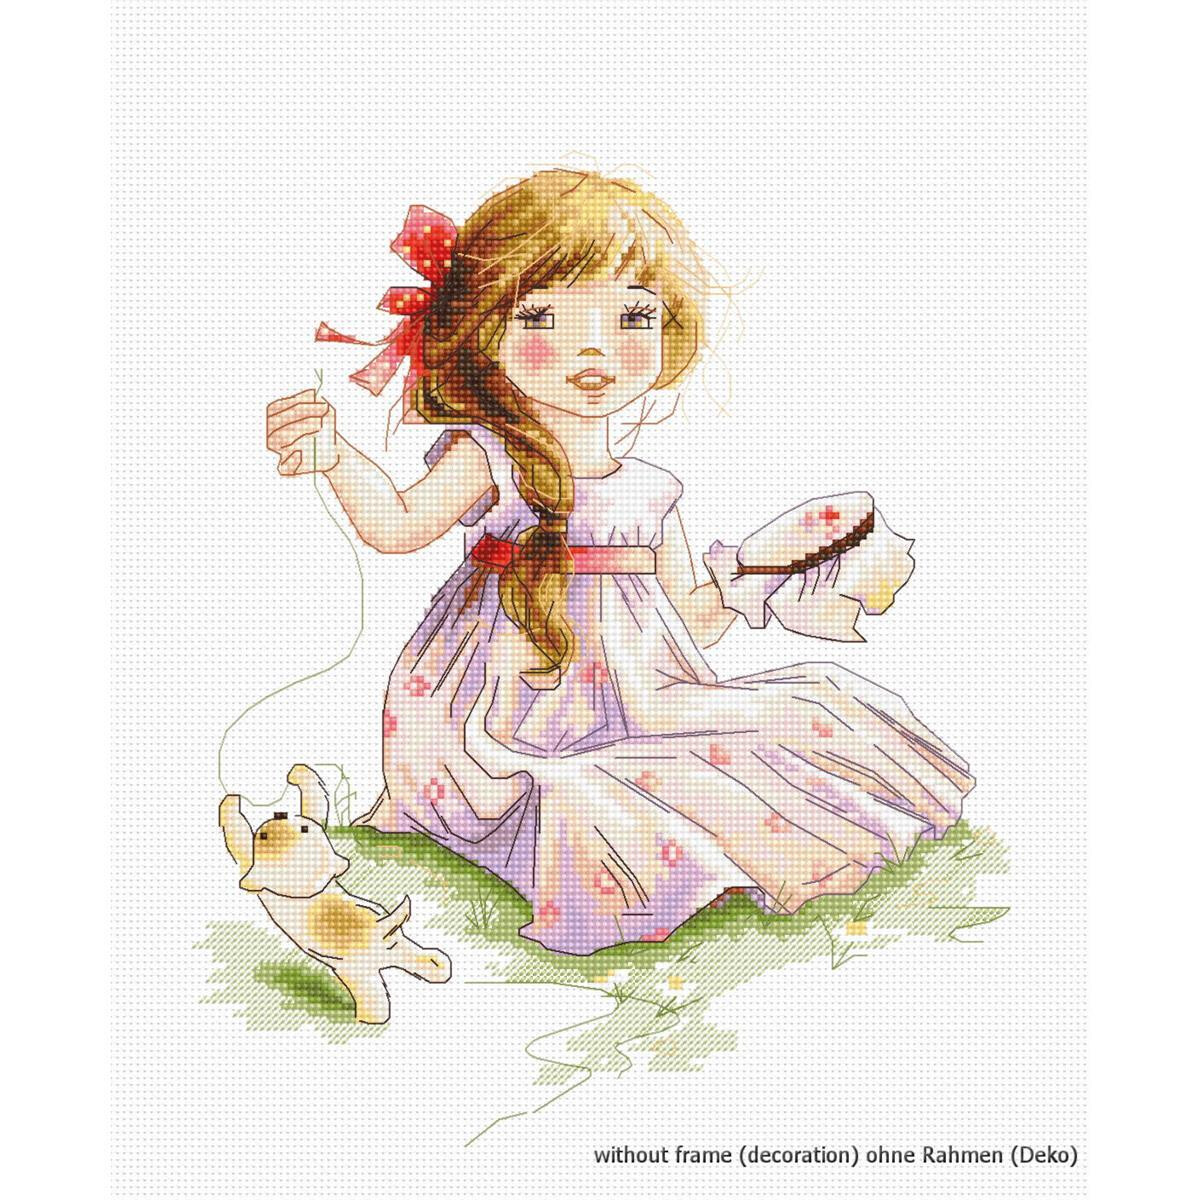 Illustration of a young girl in a pink dress with red...